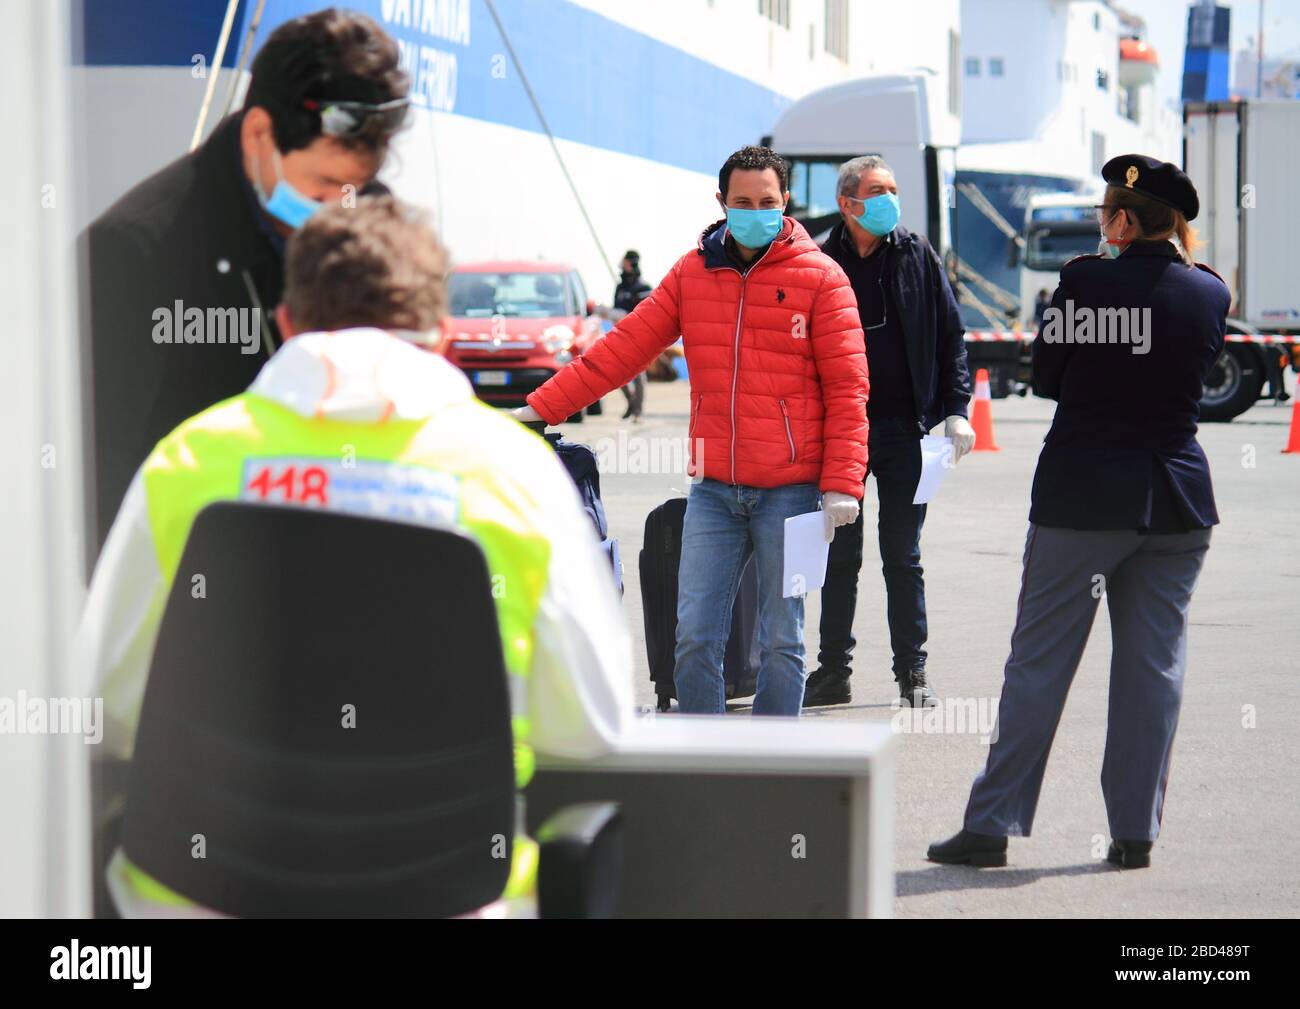 talian citizens disembarked at the port are subjected to health checks by the health authorities cause covid-19. Stock Photo